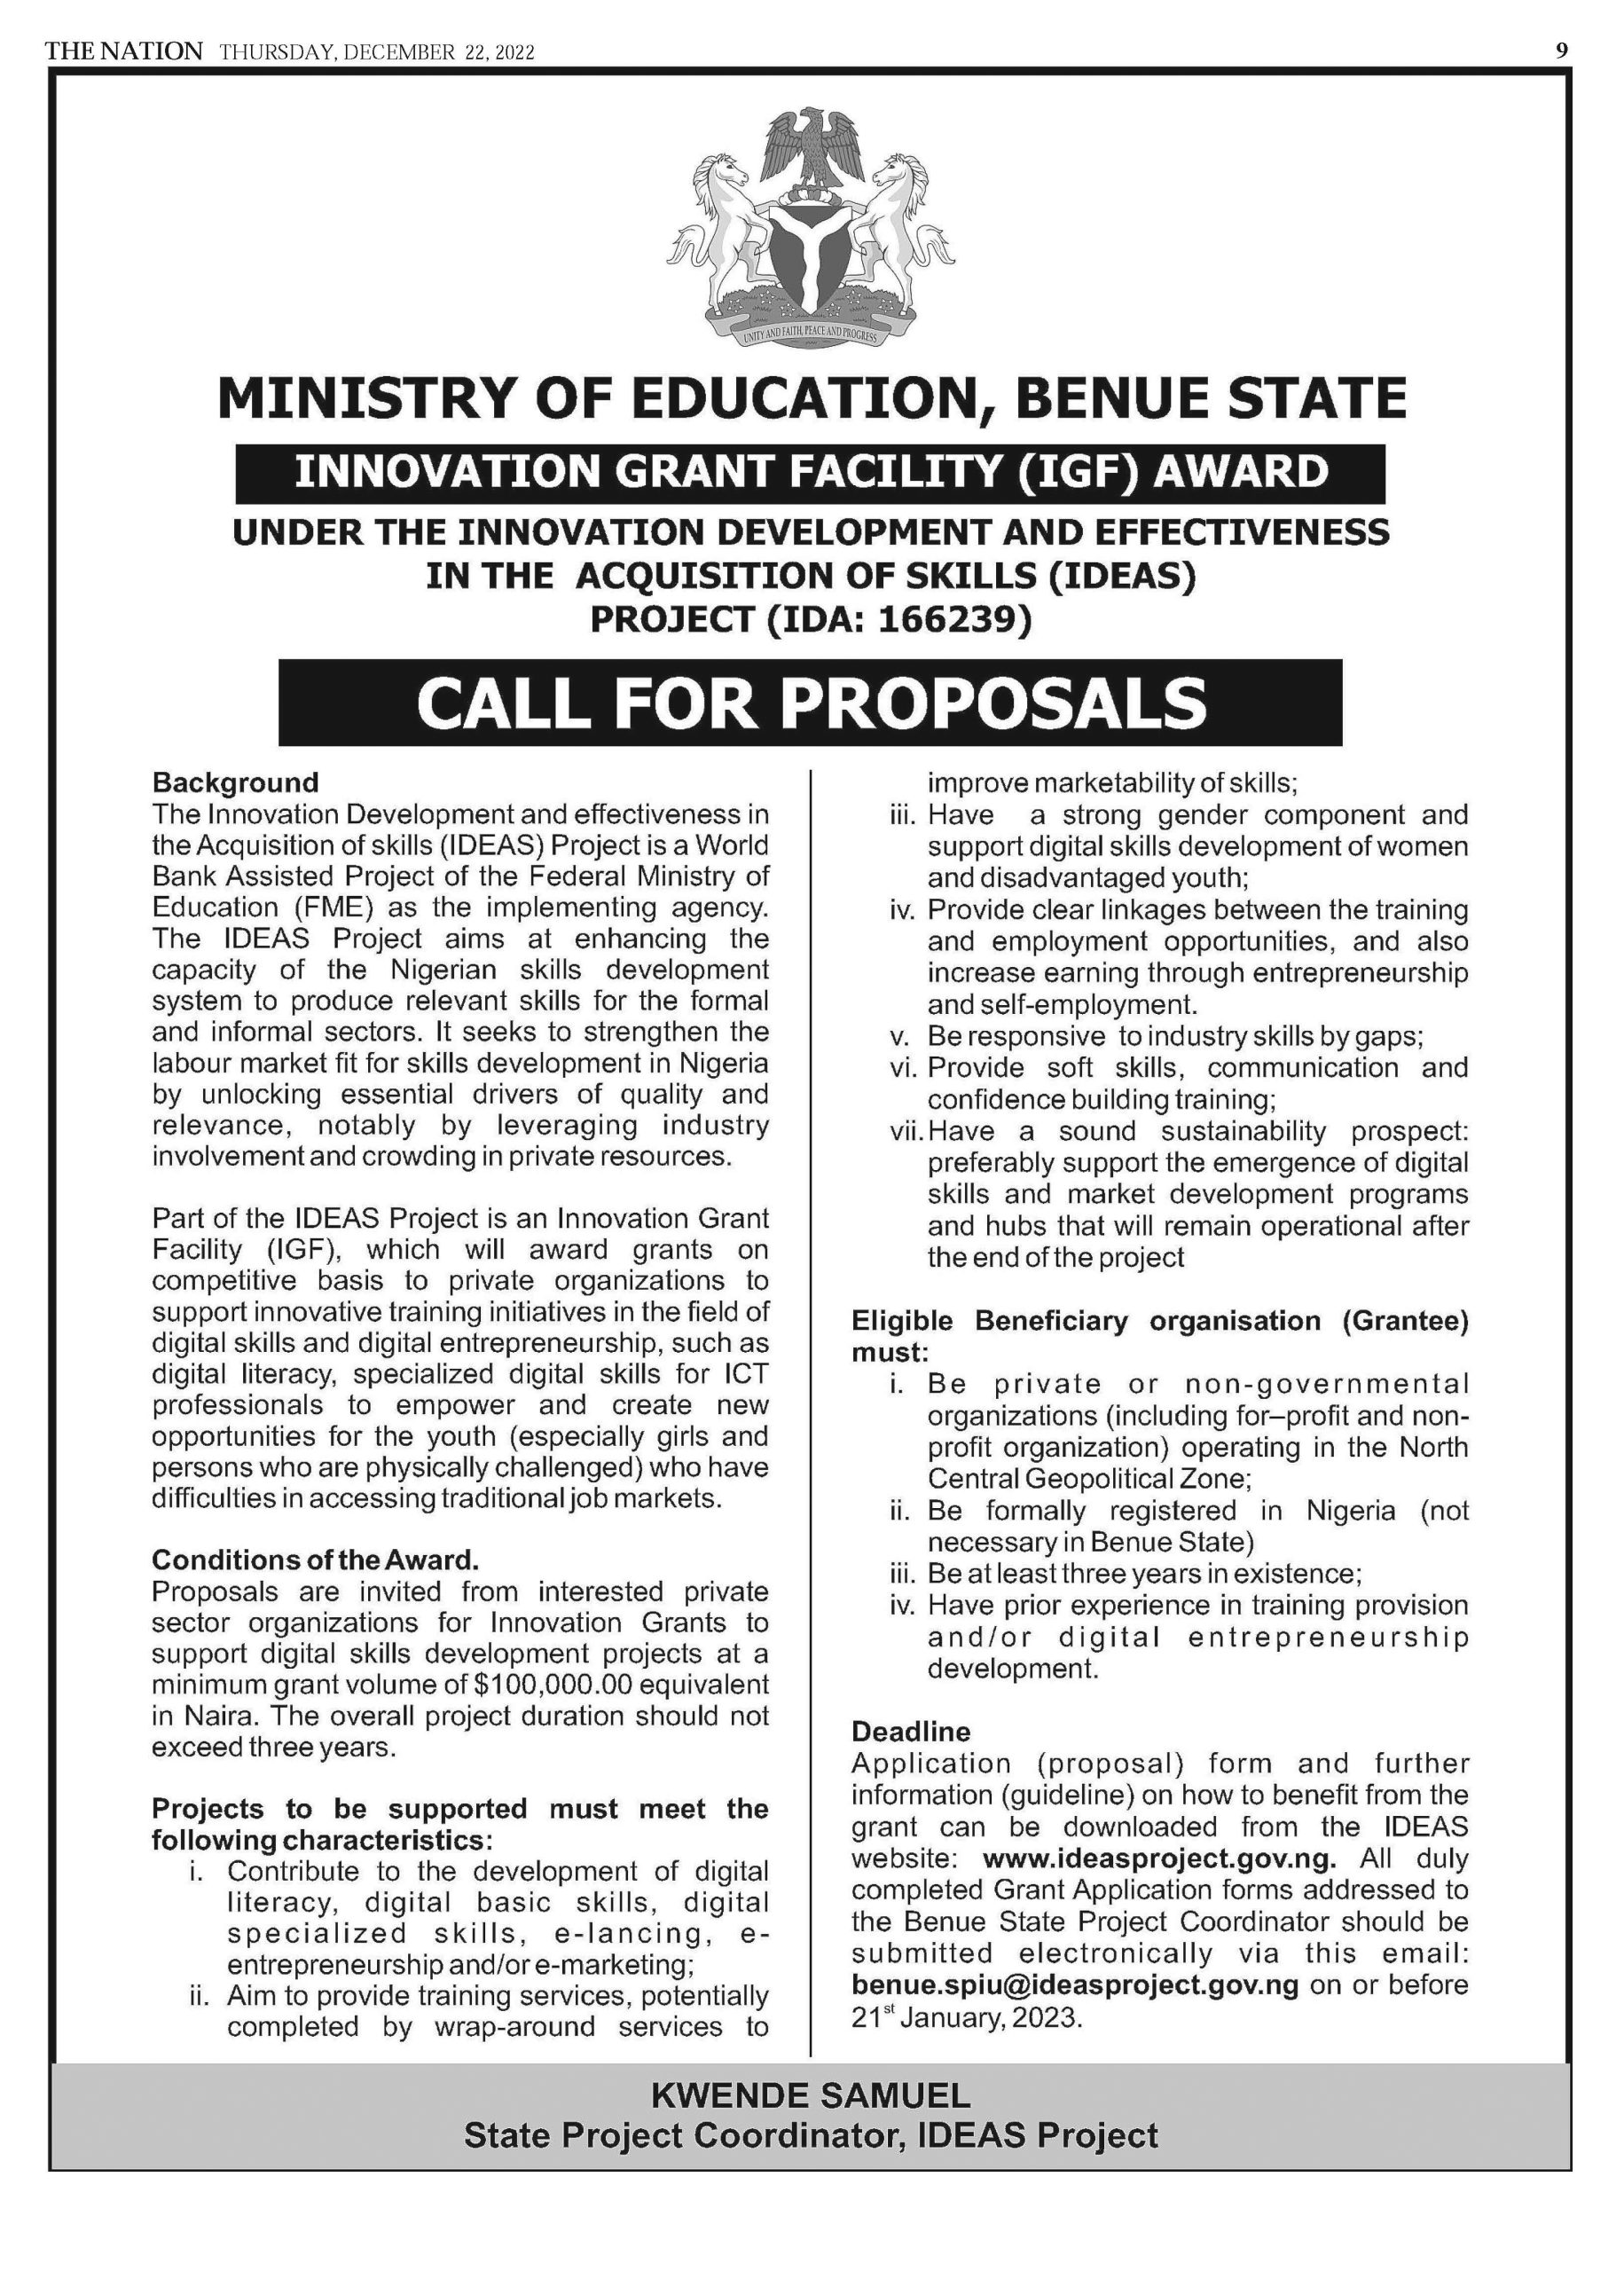 Abia SPIU Innovation Grant Call for Proposal